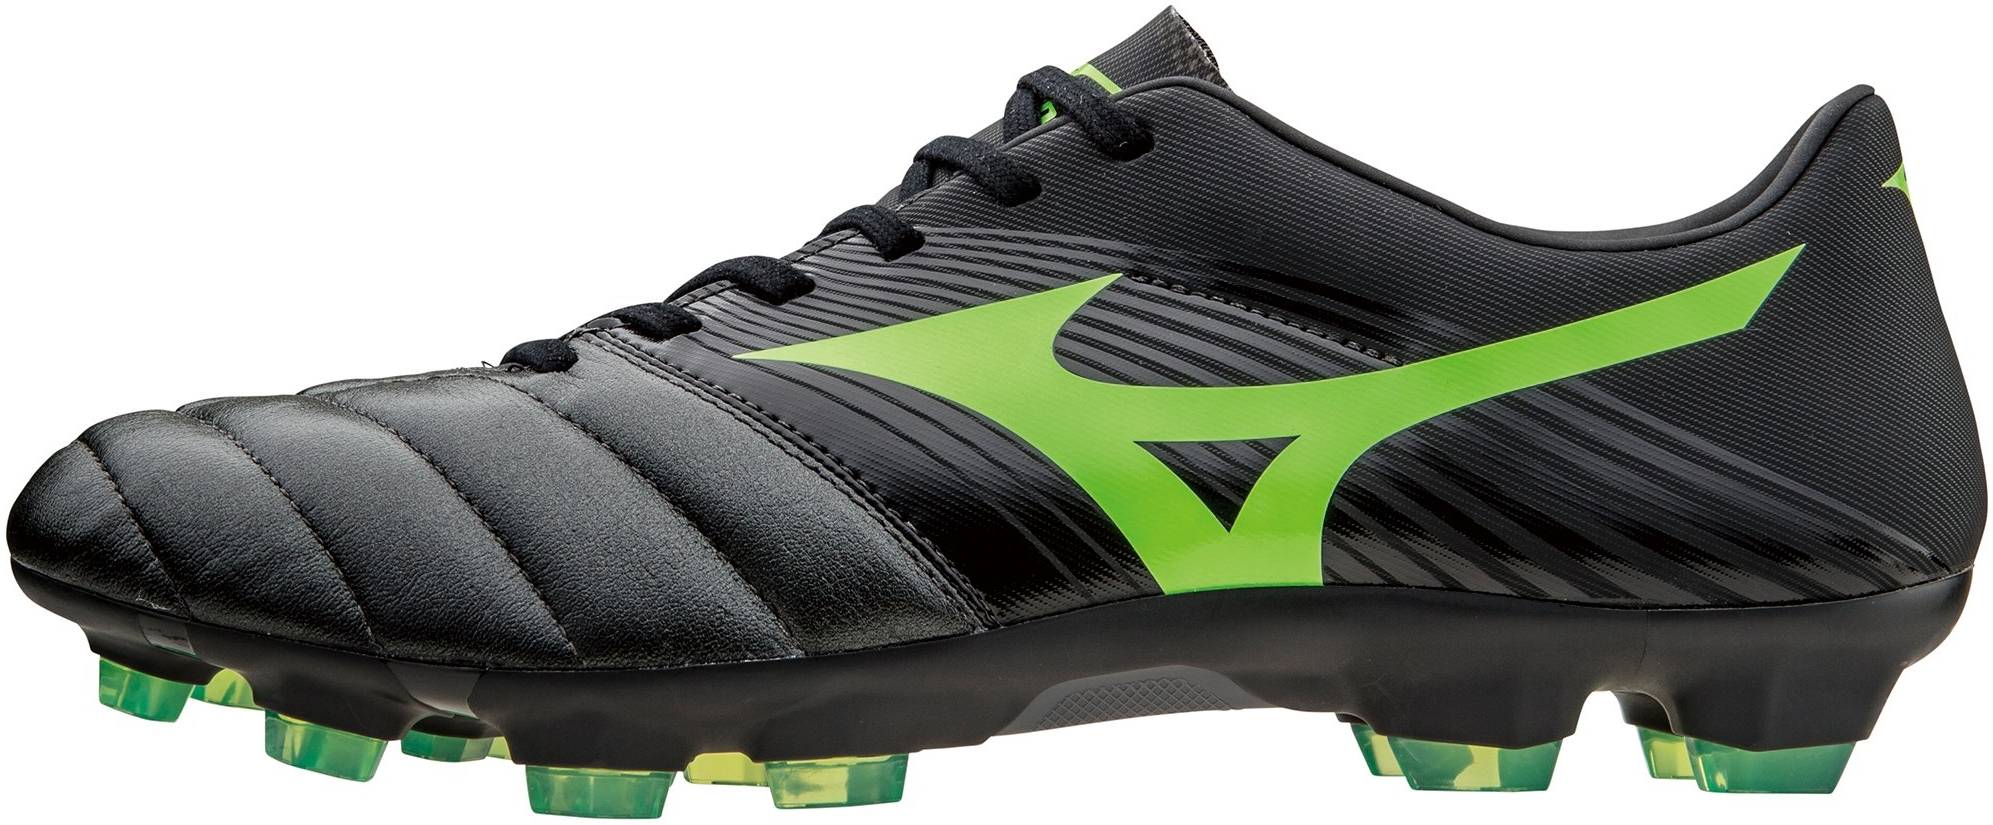 k leather football boots